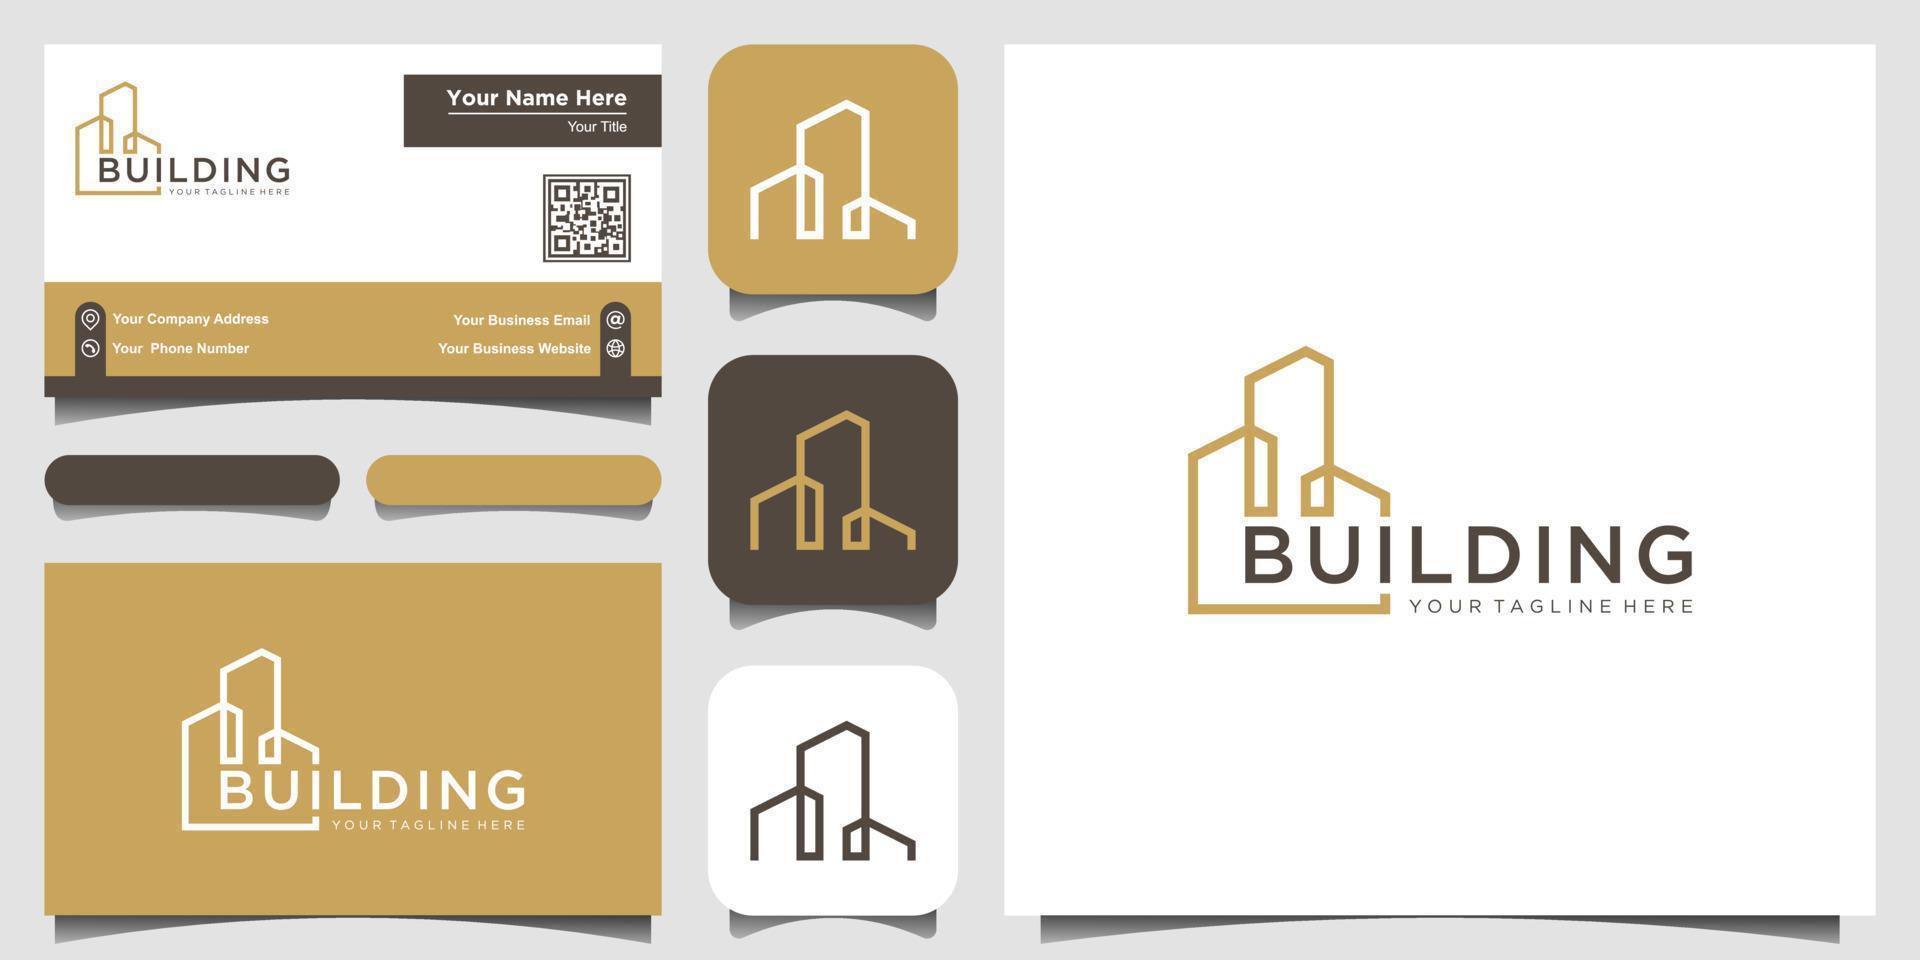 building with line art style logo and business card design. city building abstract For Logo Design Inspiration. vector